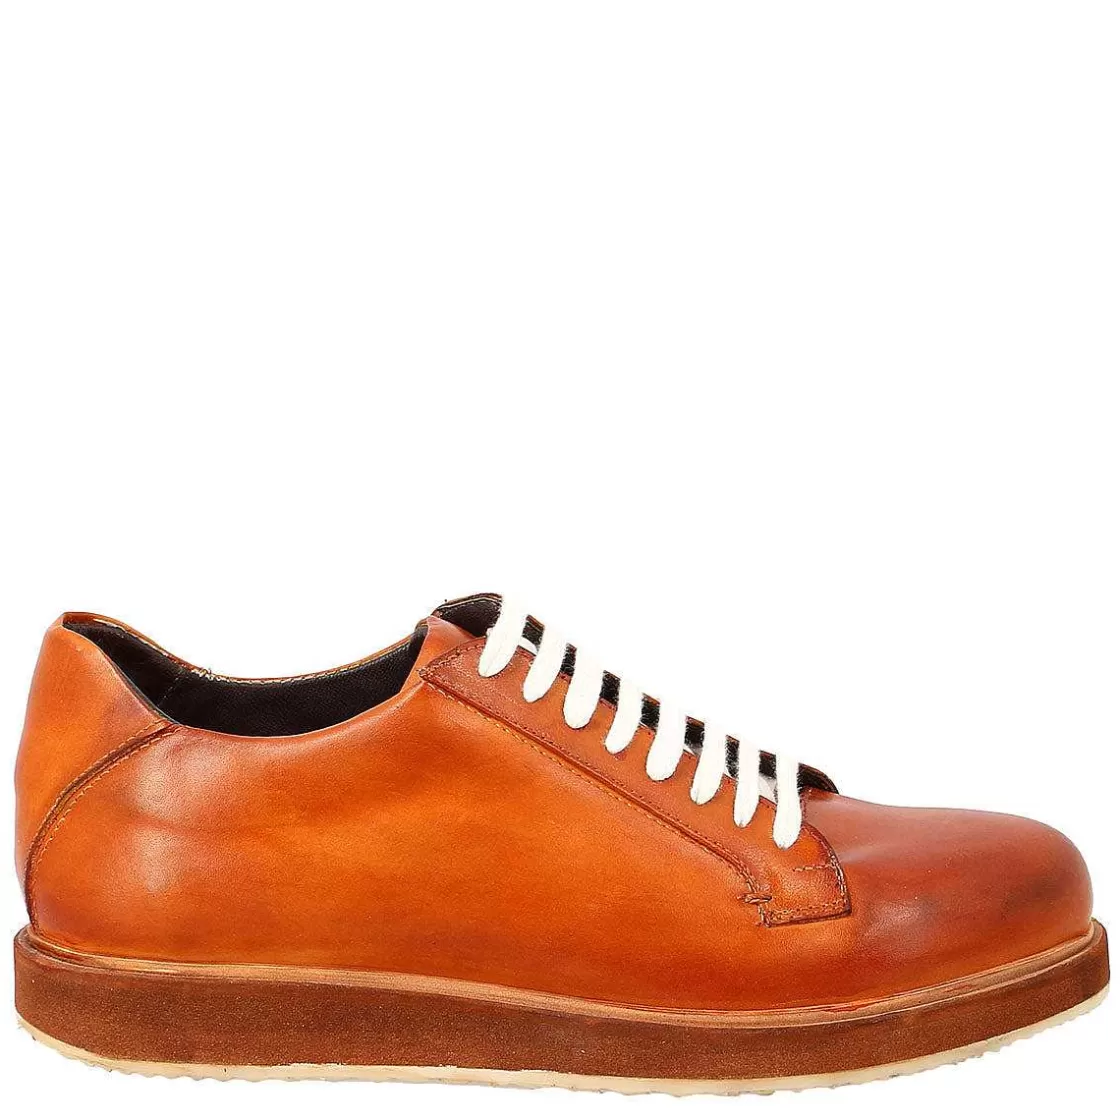 Leonardo Men'S Sneakers In Tan Leather Made And Colored By Hand. Clearance